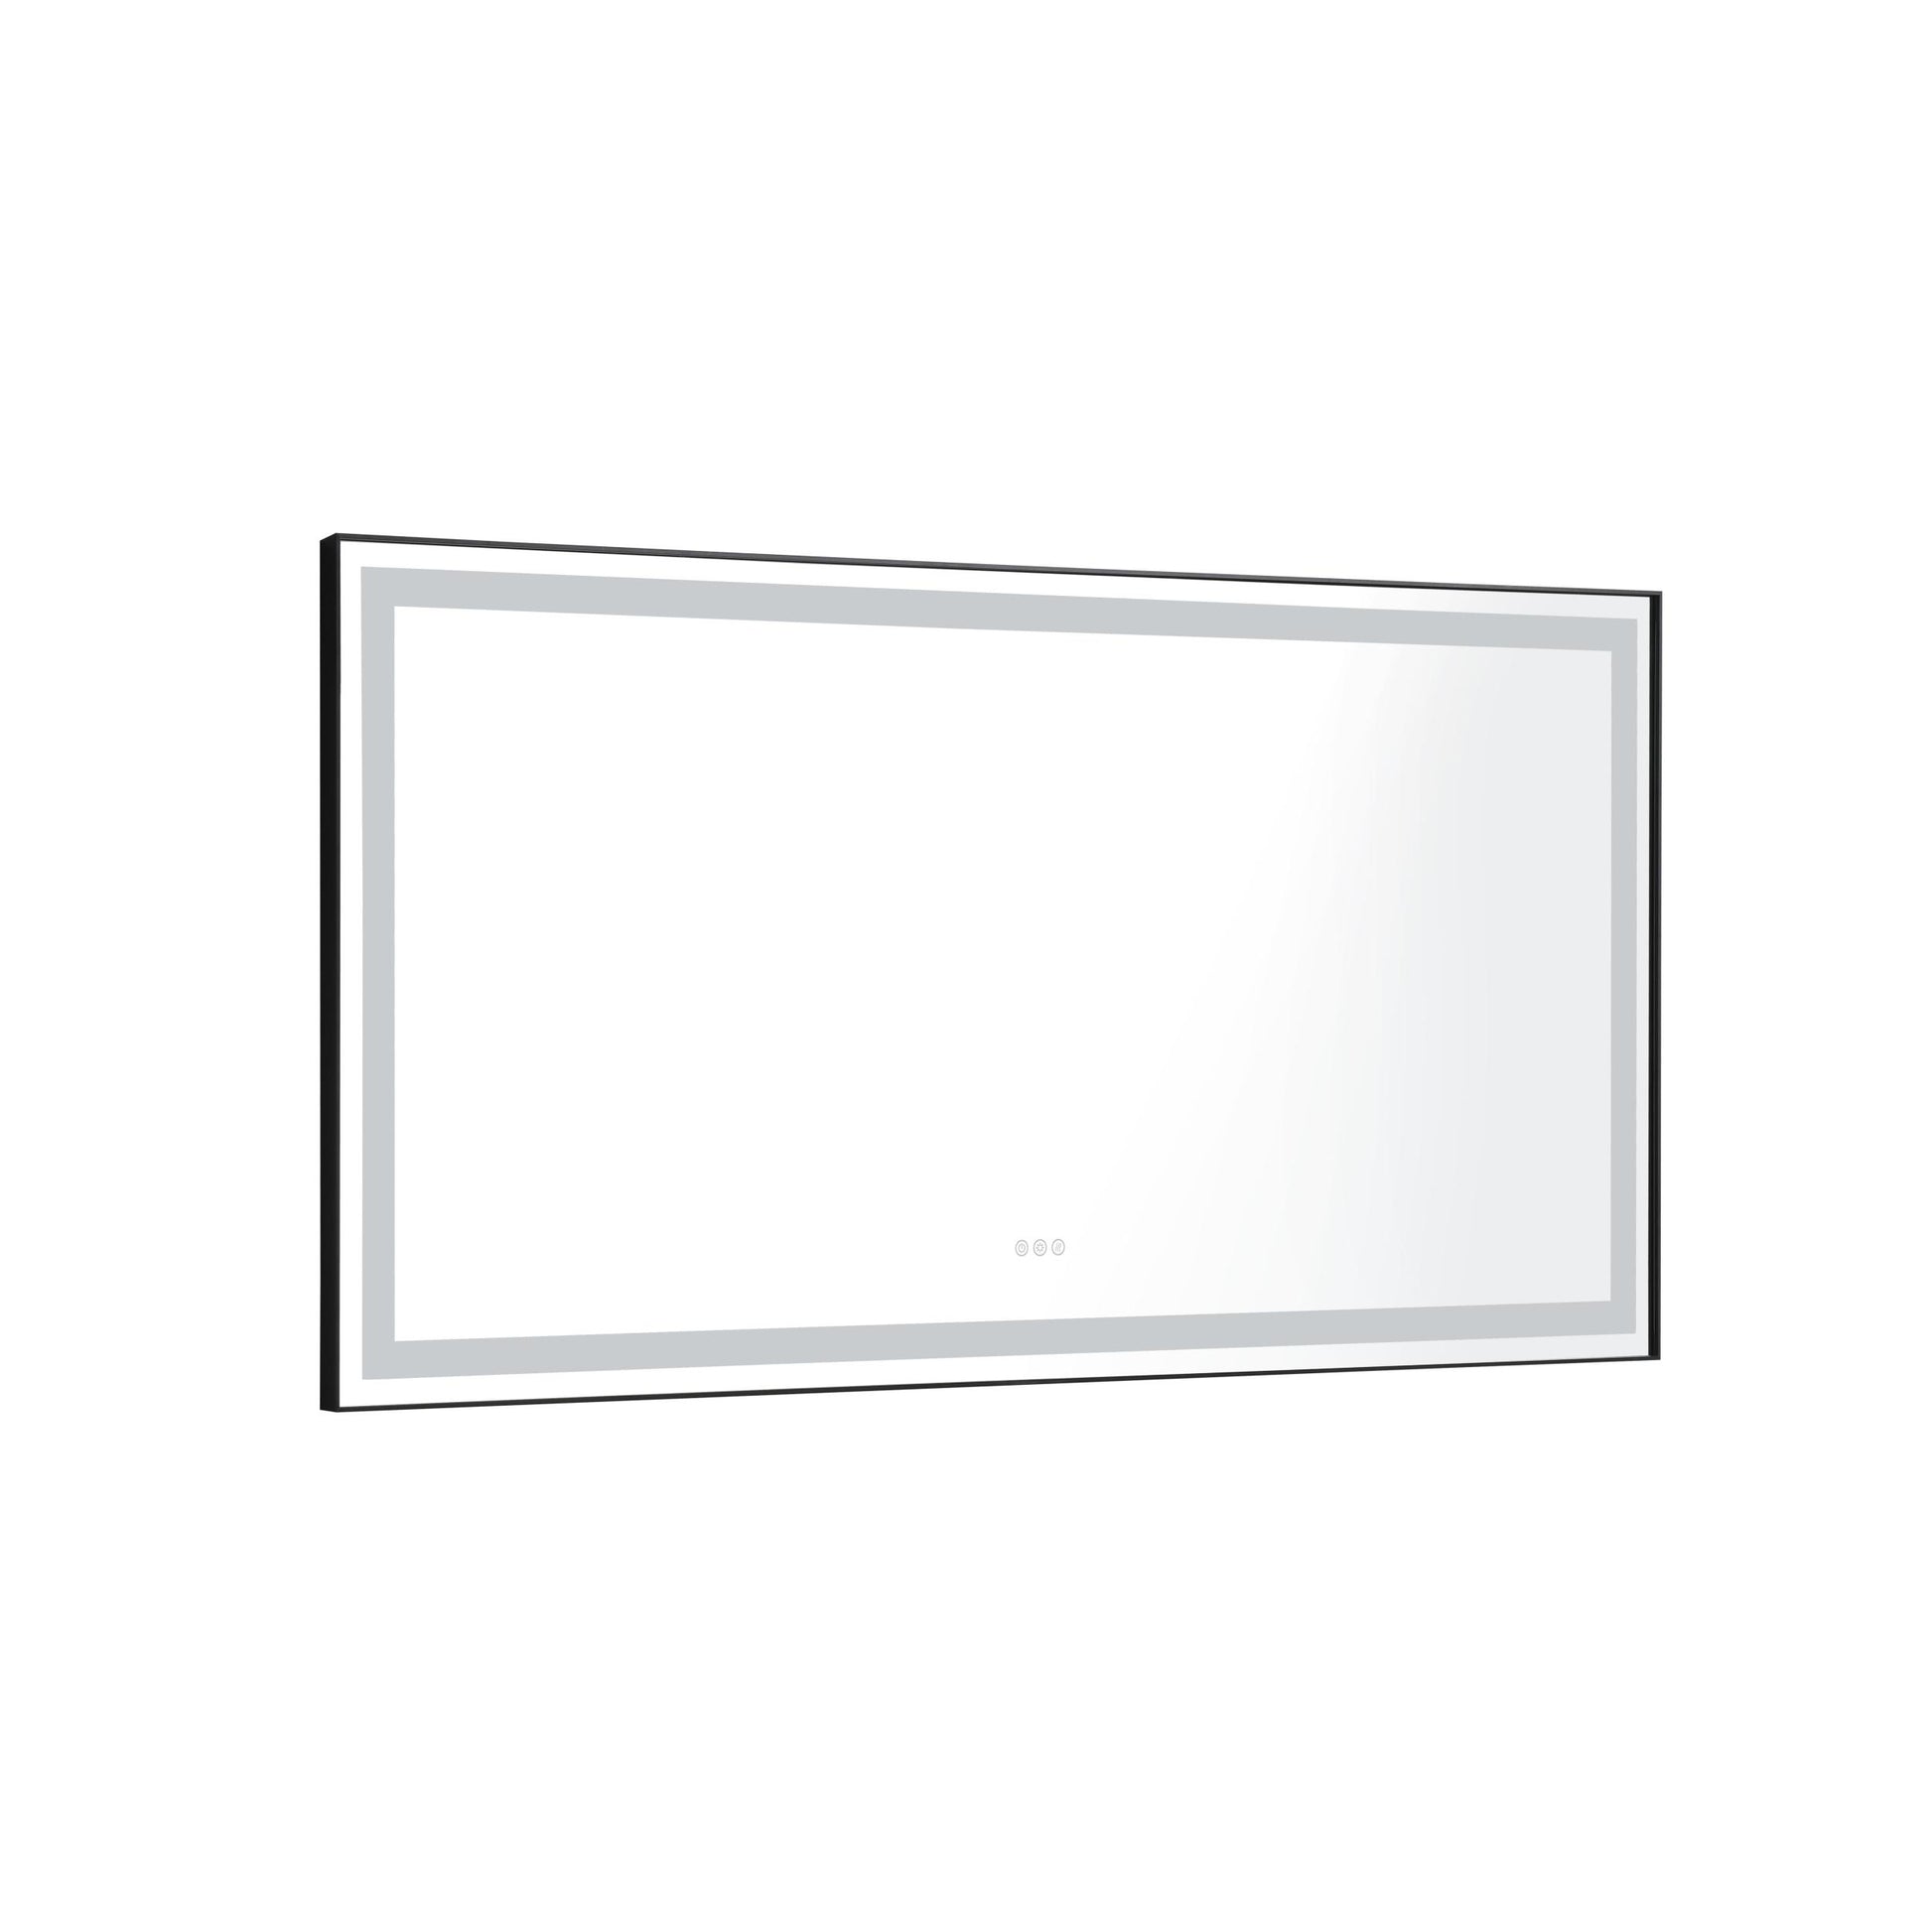 Bathroom Led Mirror Is Multi Functional And Each